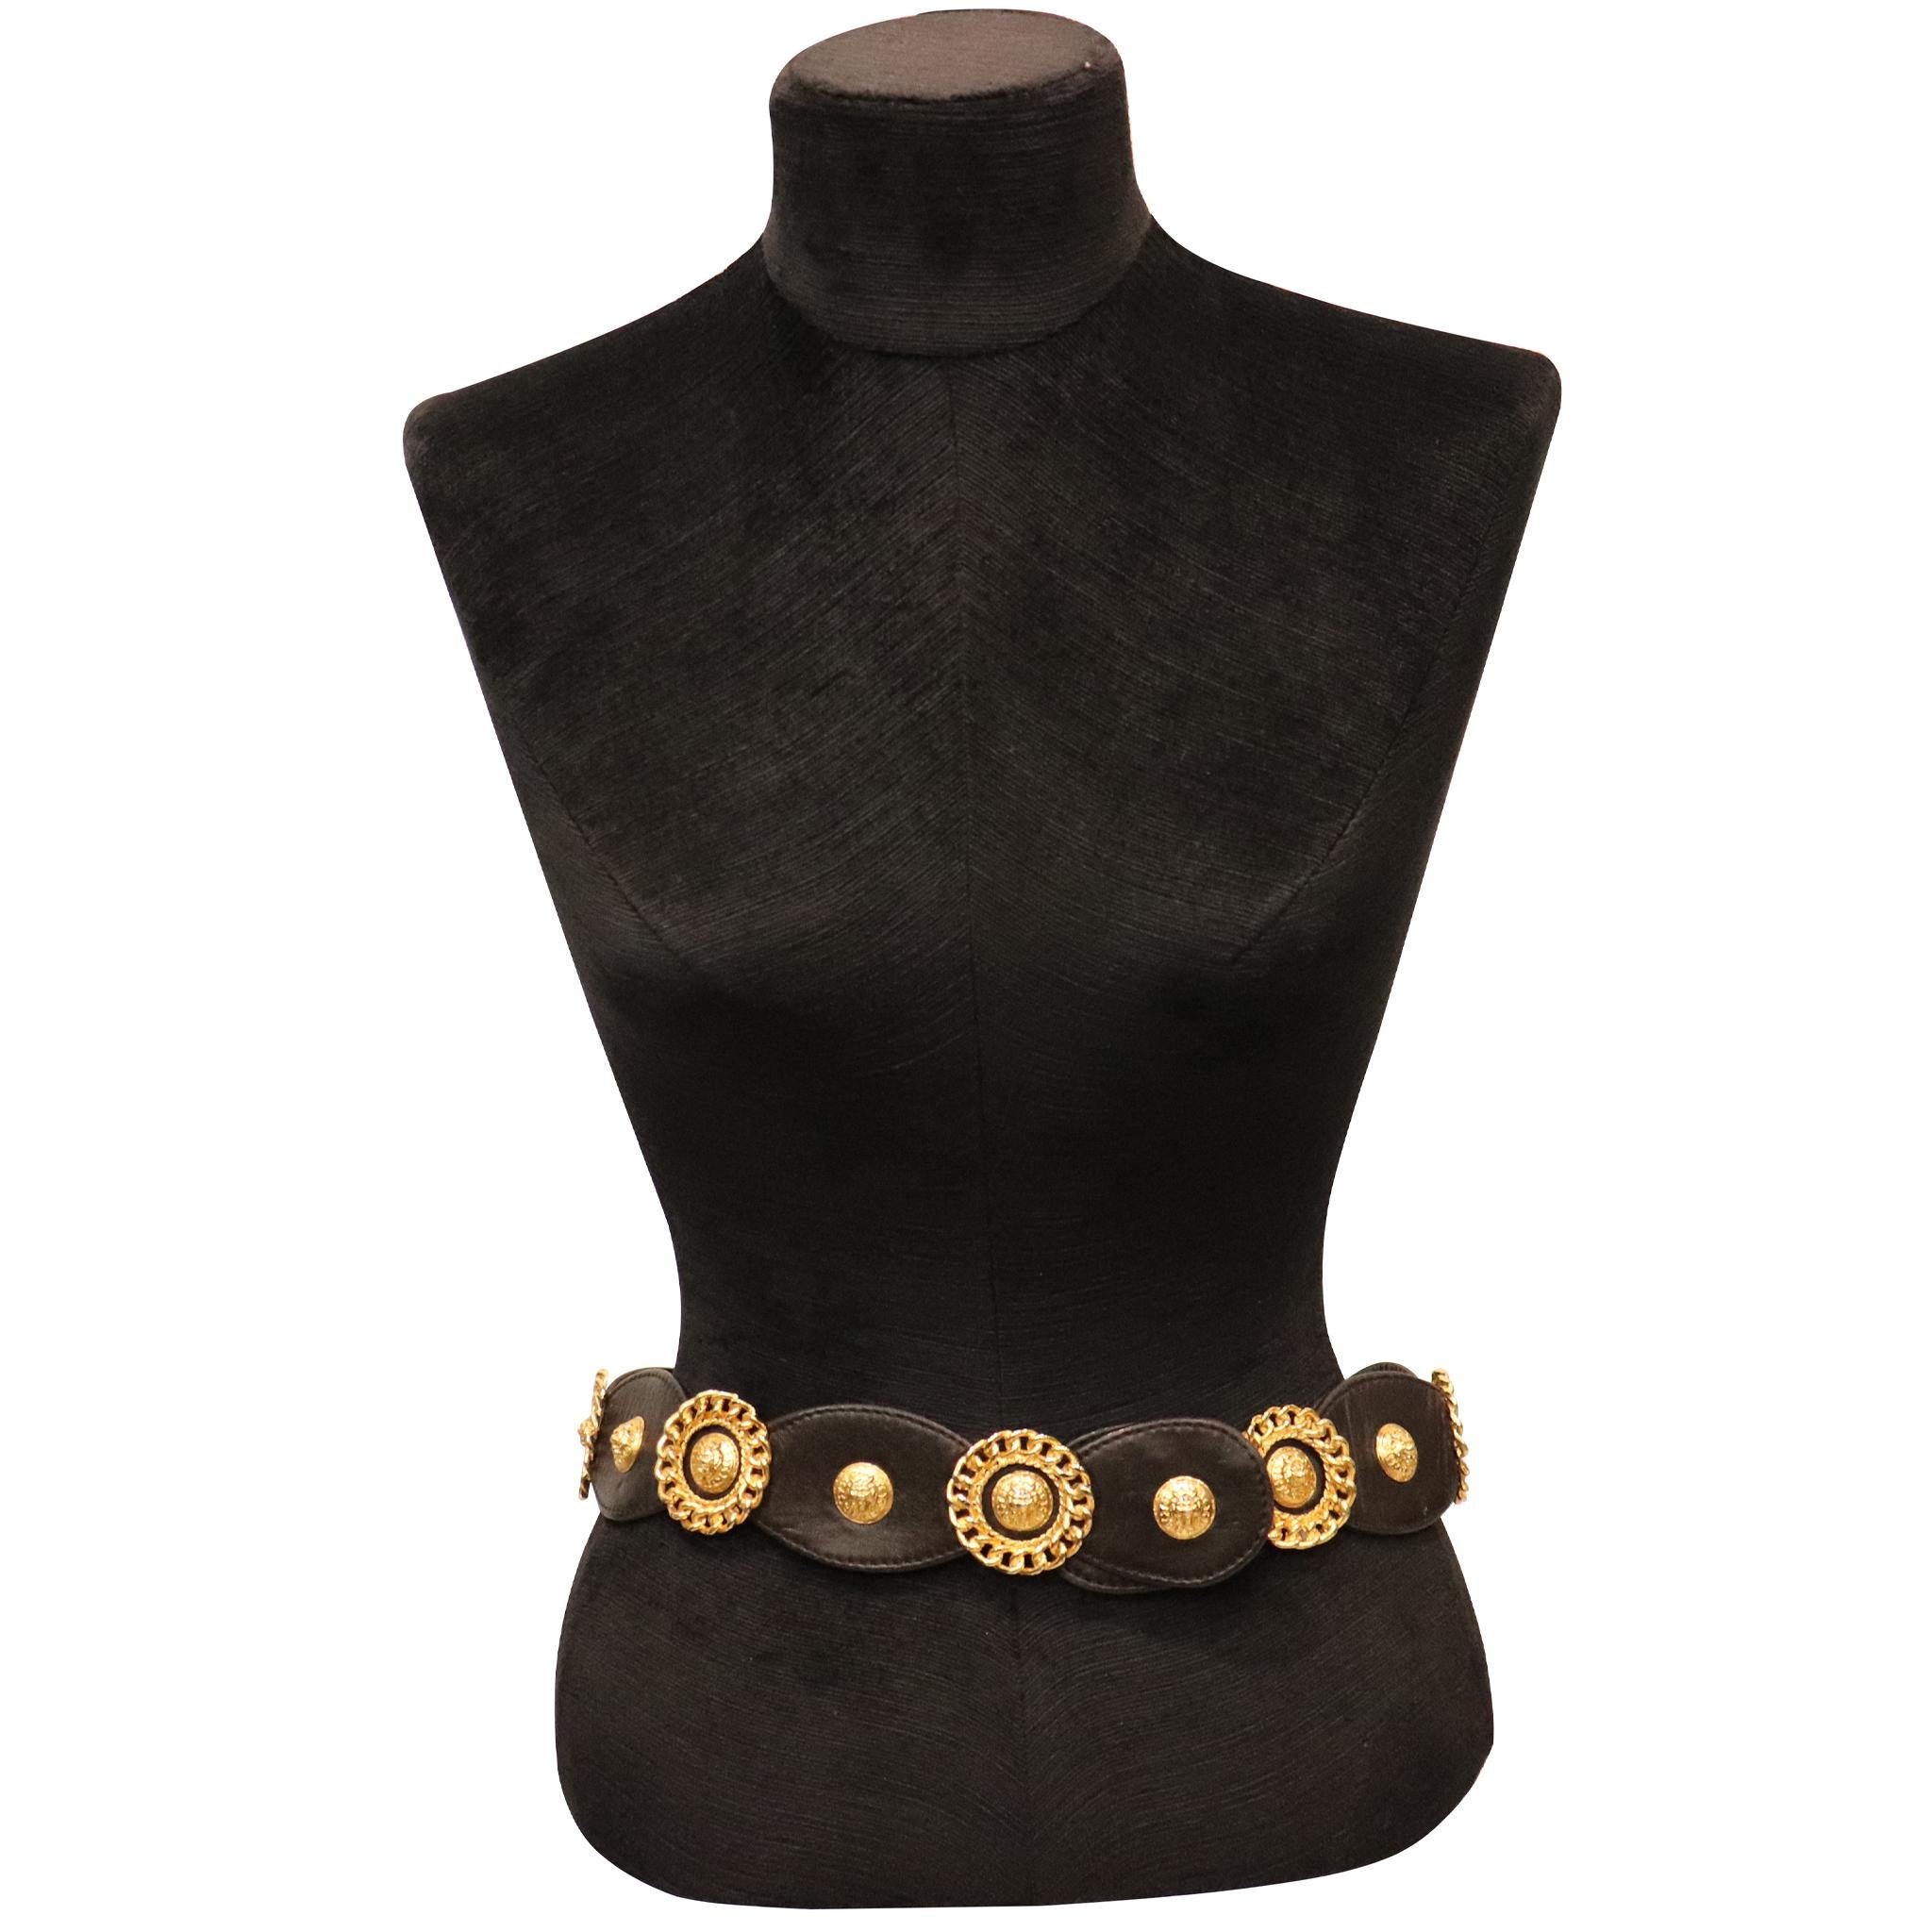 Jean L'Insolite Black Leather W/ Gold Accents Belt. From 1980s is in excellent condition 

Measurements: 

Longest Length - 31.6 inches
Shortest length - 30.4 inches 
Height - 2 inches 